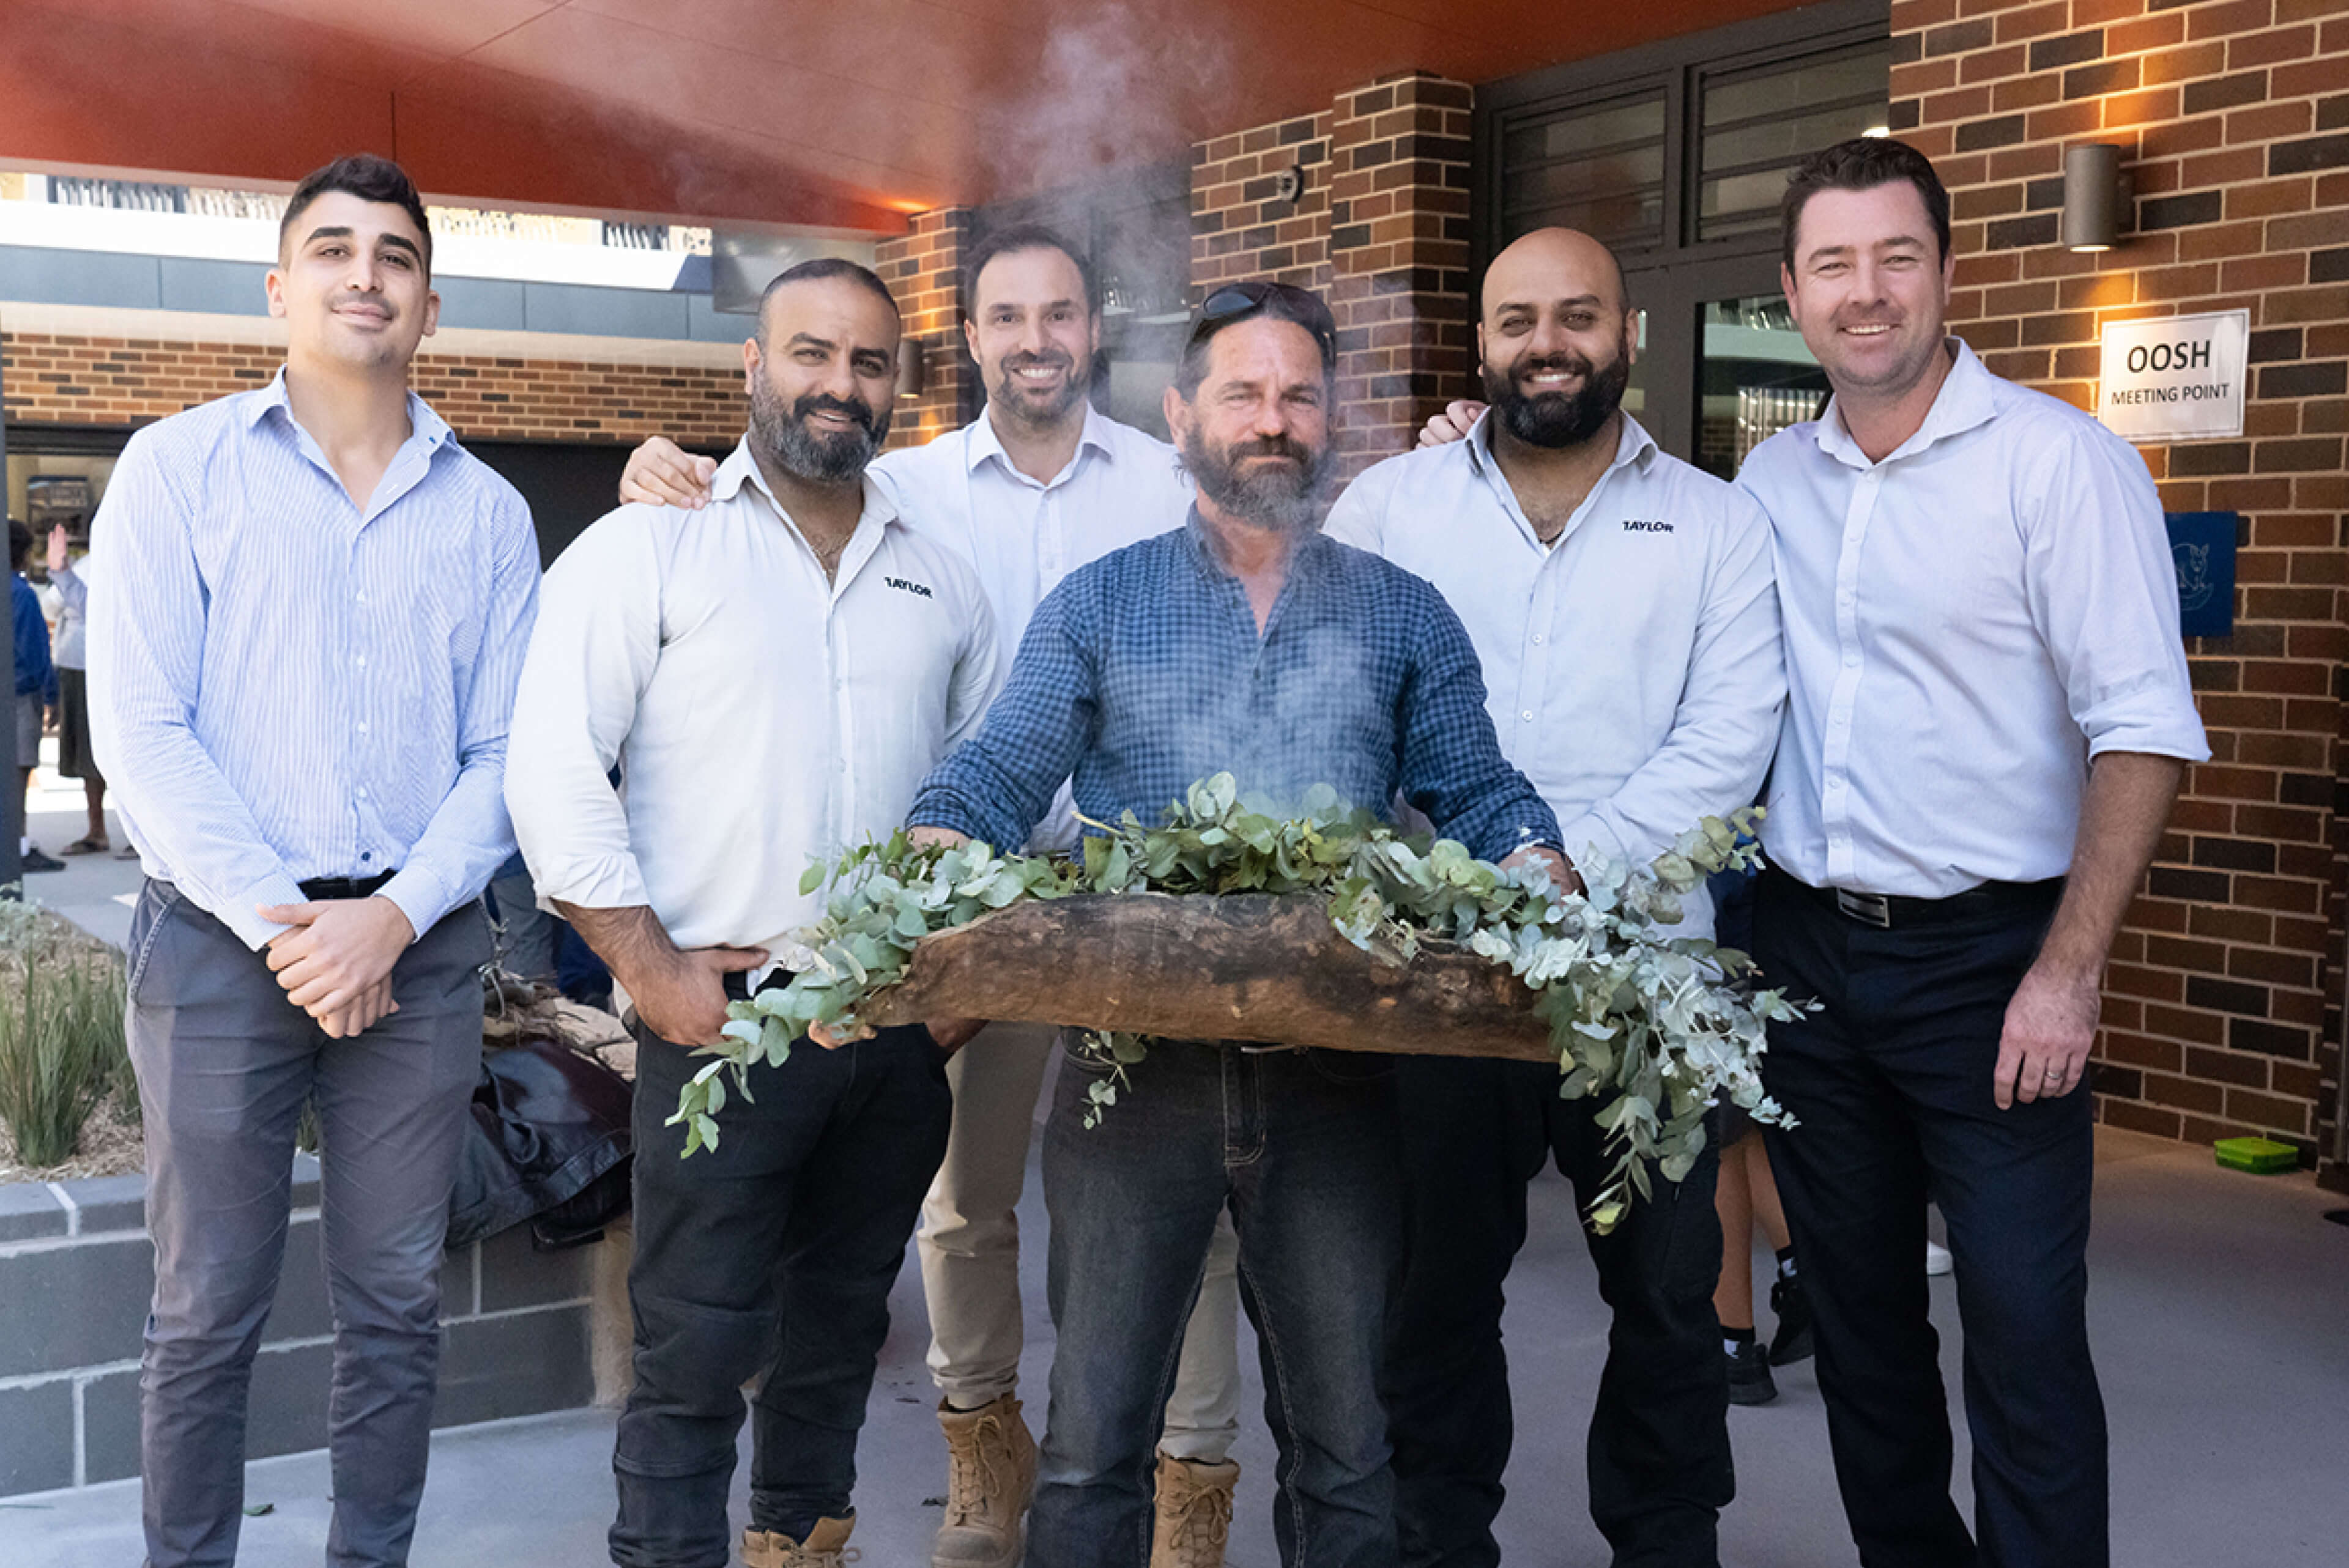 03 diversity and inclusion team taylor and darug people smoking ceremony with taylor team taylor construction photography